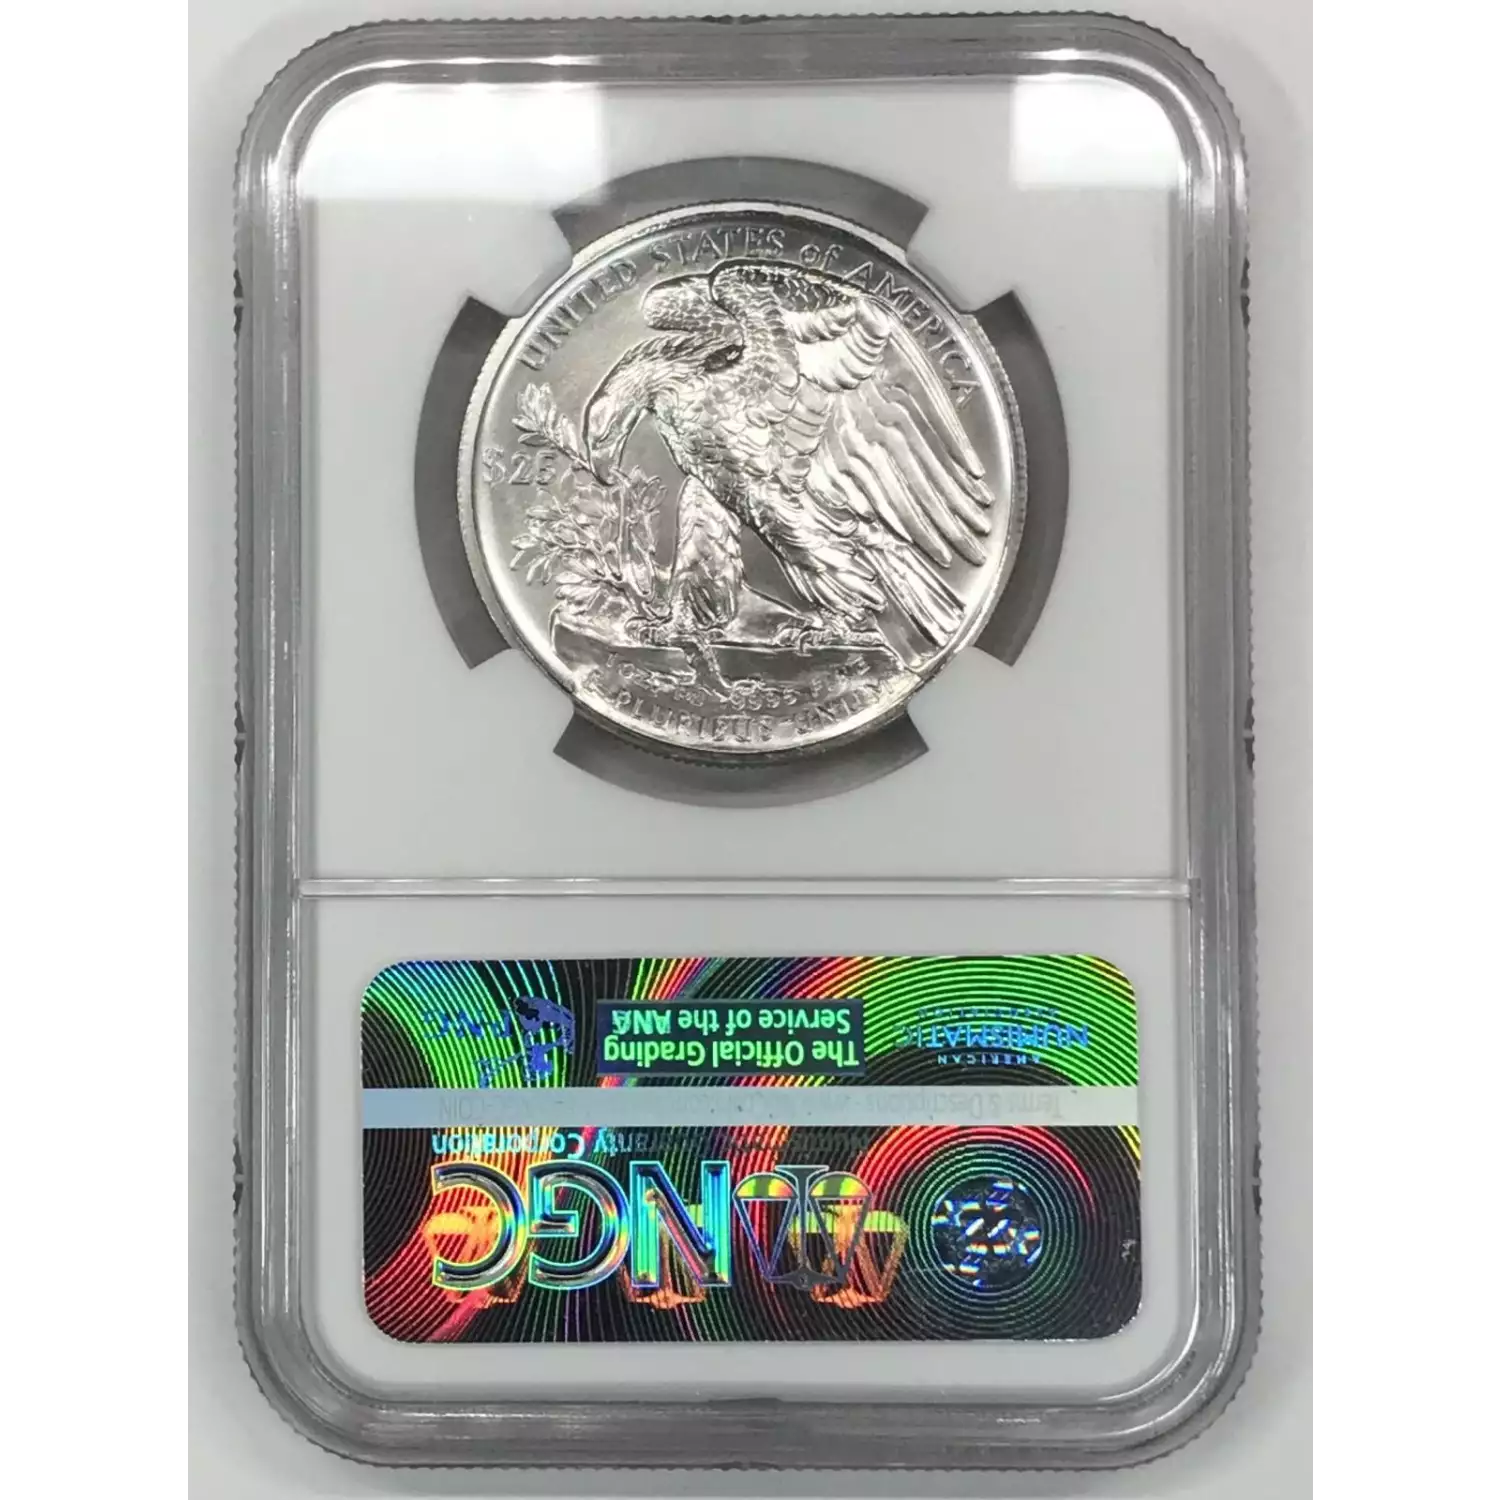 2017 HIGH RELIEF EARLY RELEASES FIRST PALLADIUM US COIN  (2)